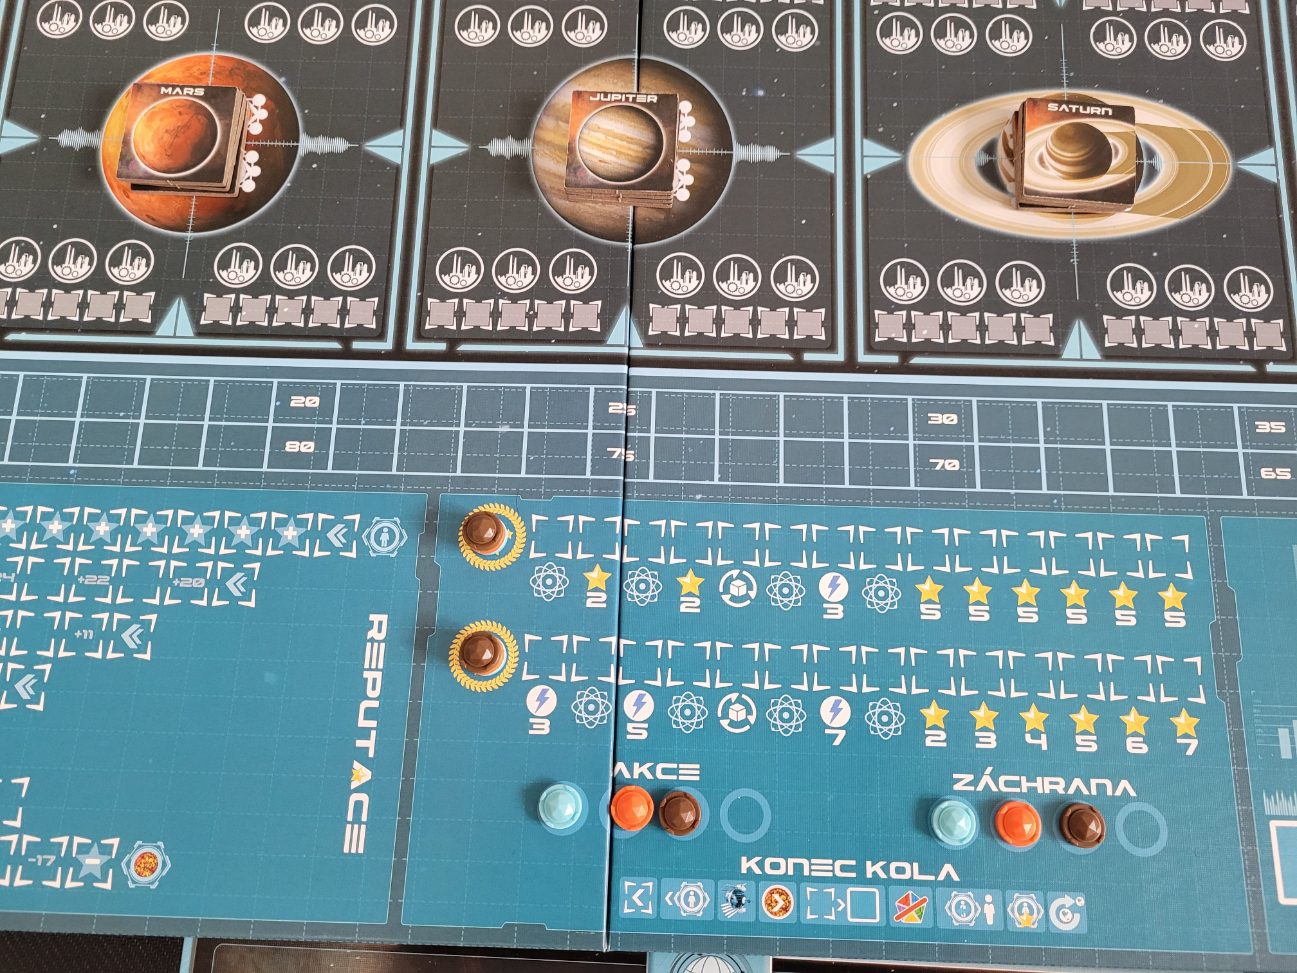 Review of the board game Interstellar Spaceship Spaceship Interstellar 2